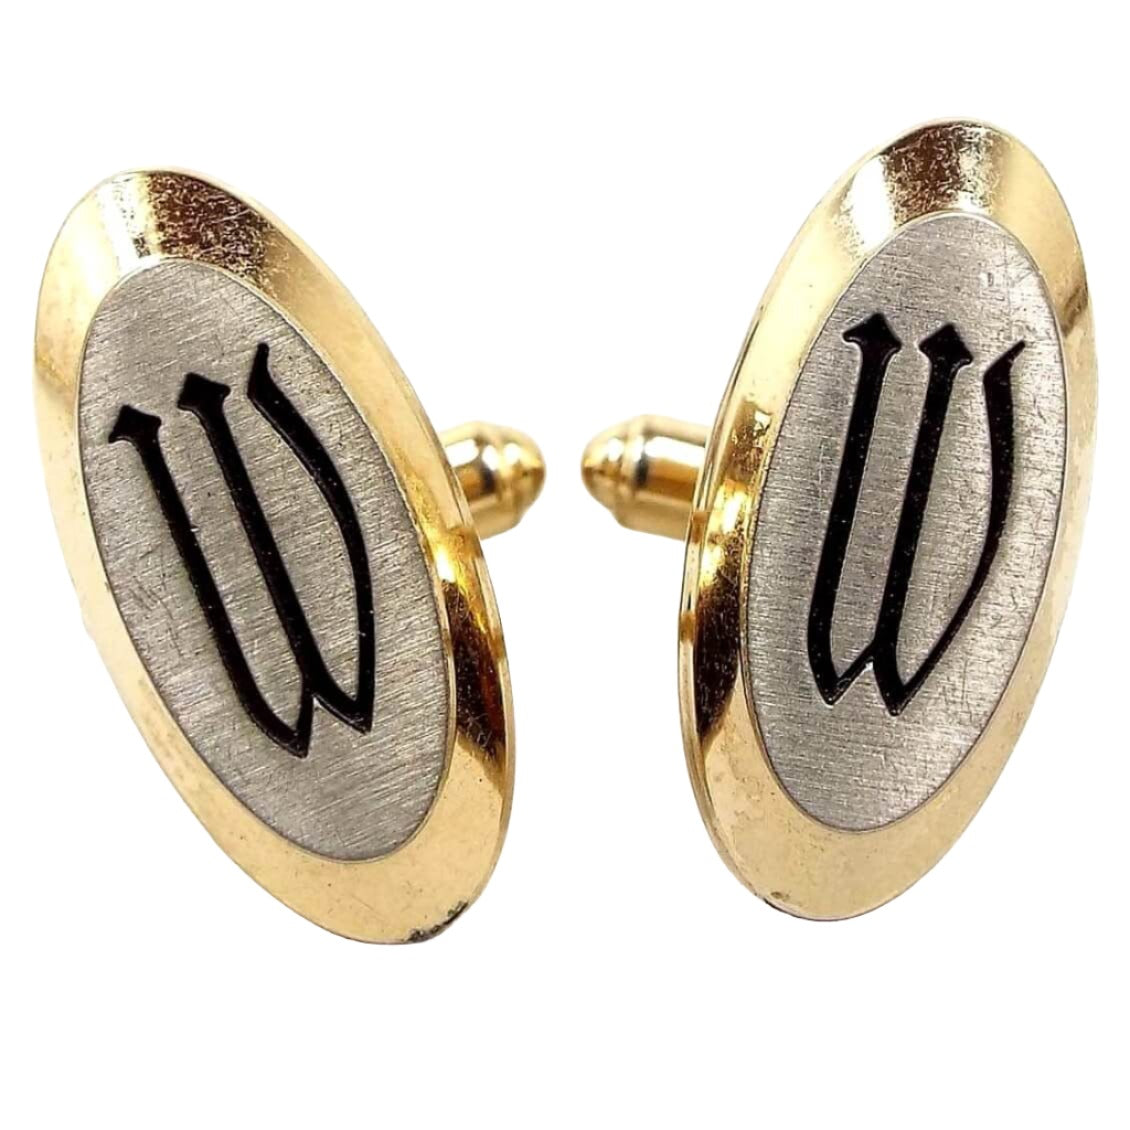 Front view of the Mid Century vintage Hickok initial cufflinks. They are mostly gold tone in color with matte silver tone color fronts. The letter W is engraved in black on the front.